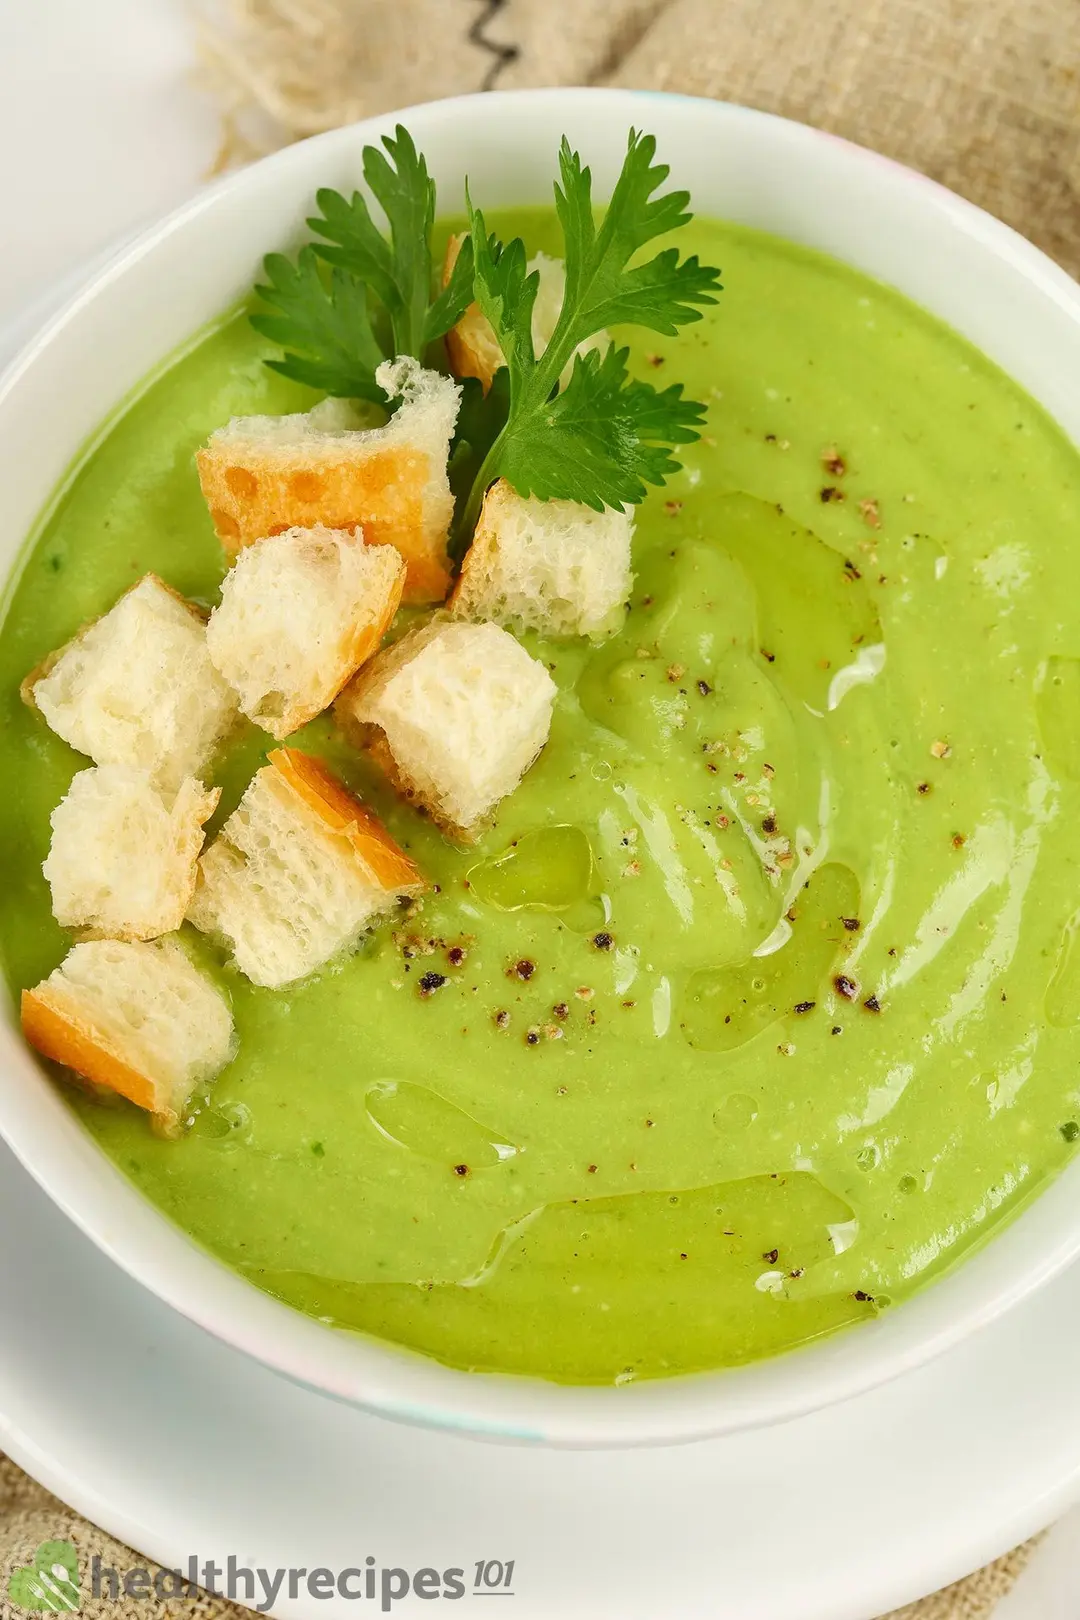 a bowl of avocado soup with croutons and coriander for garnish